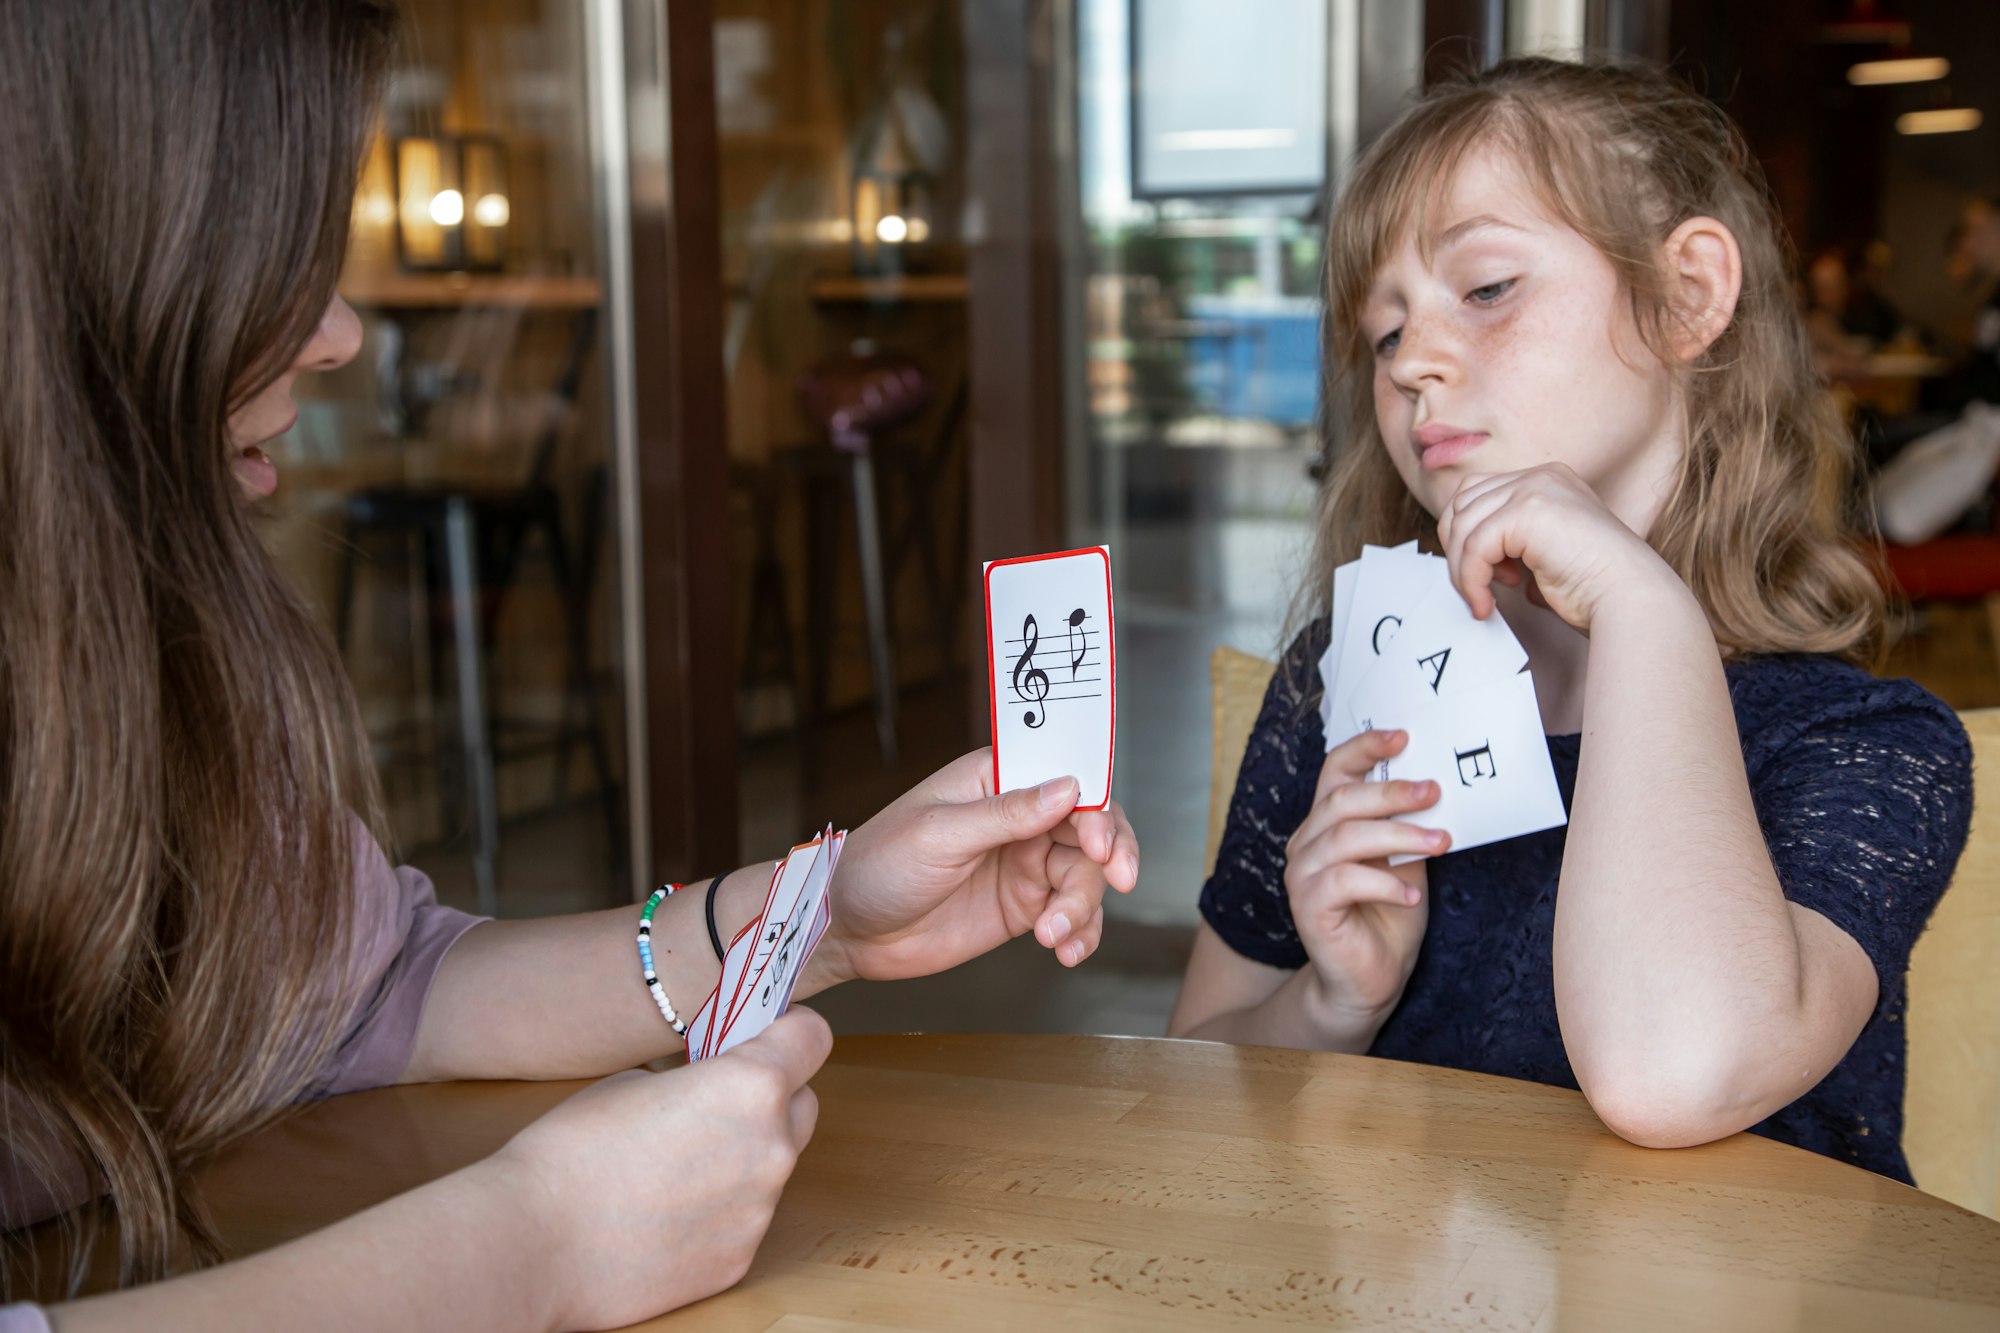 A mom and daughter using music note flashcards to visualize when memorizing.